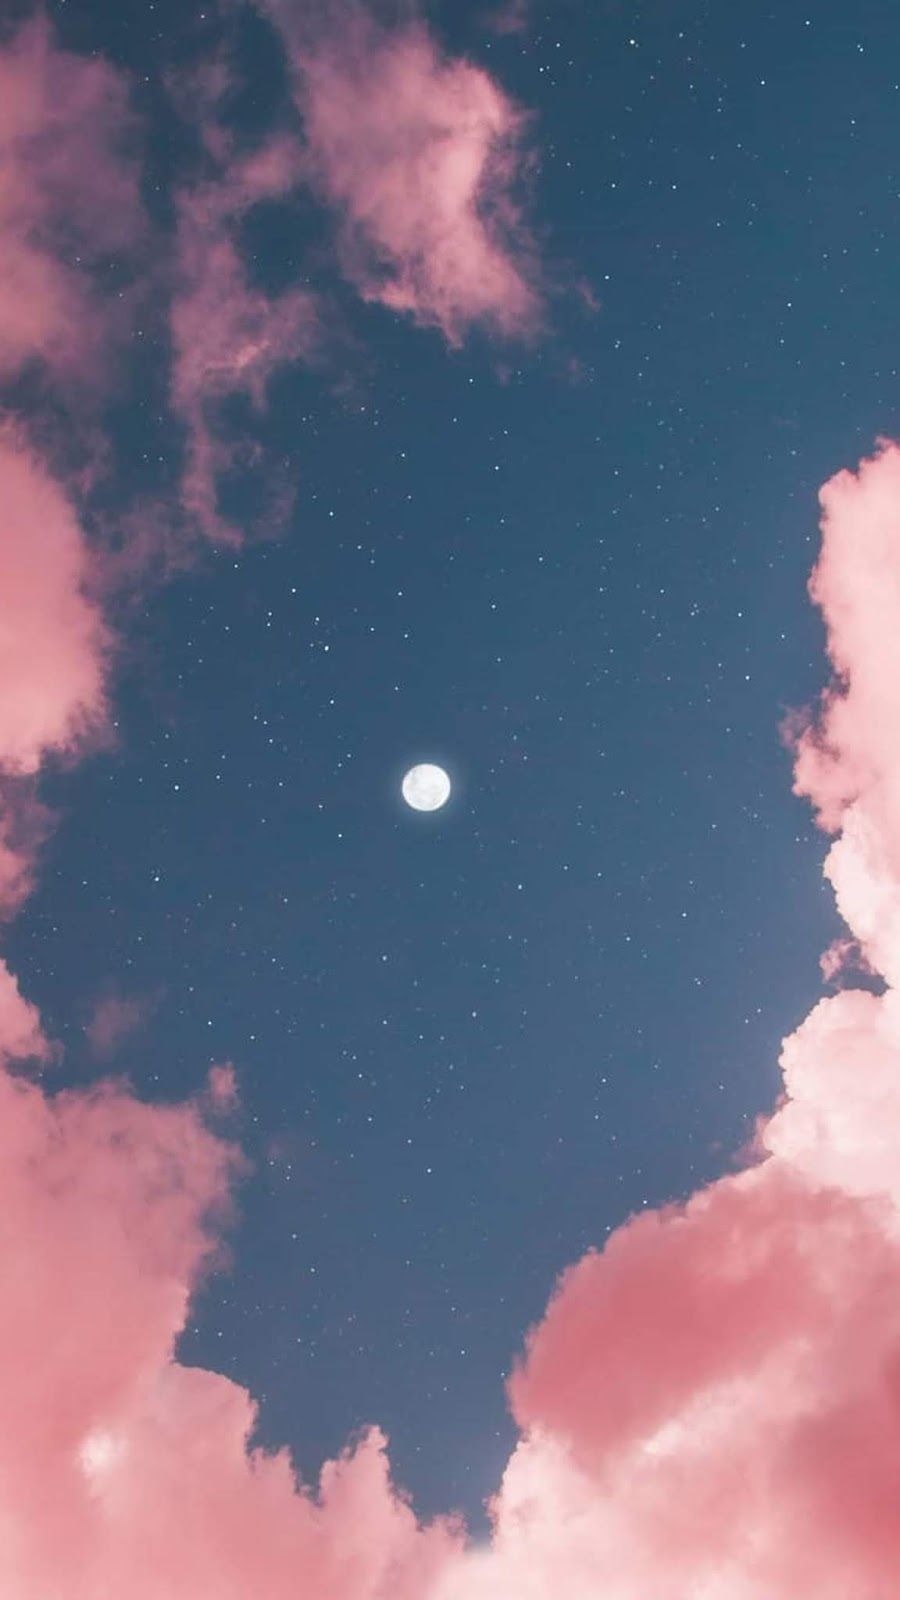 Full moon in pink sky by matialonsor. Pink sky, iPhone wallpaper